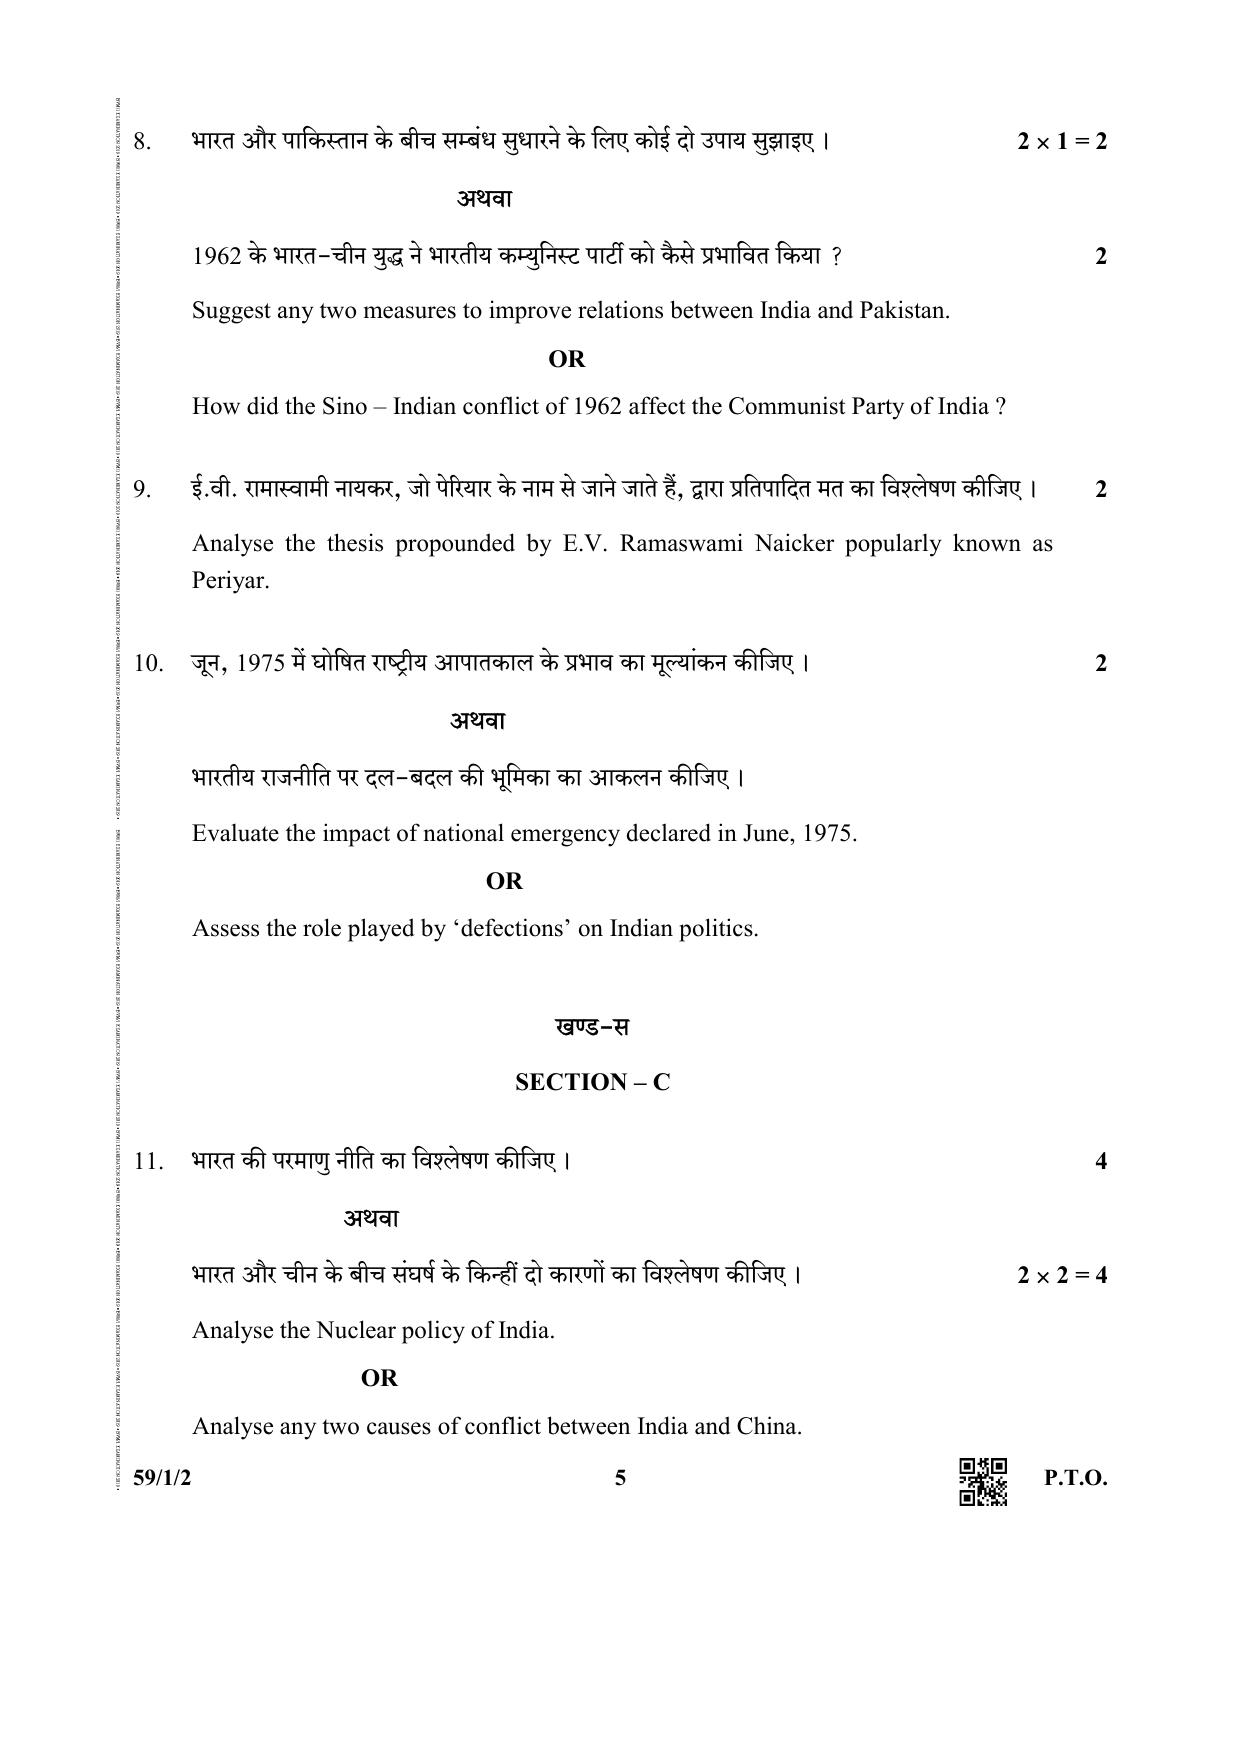 CBSE Class 12 59-1-2 (Political Science) 2019 Question Paper - Page 5